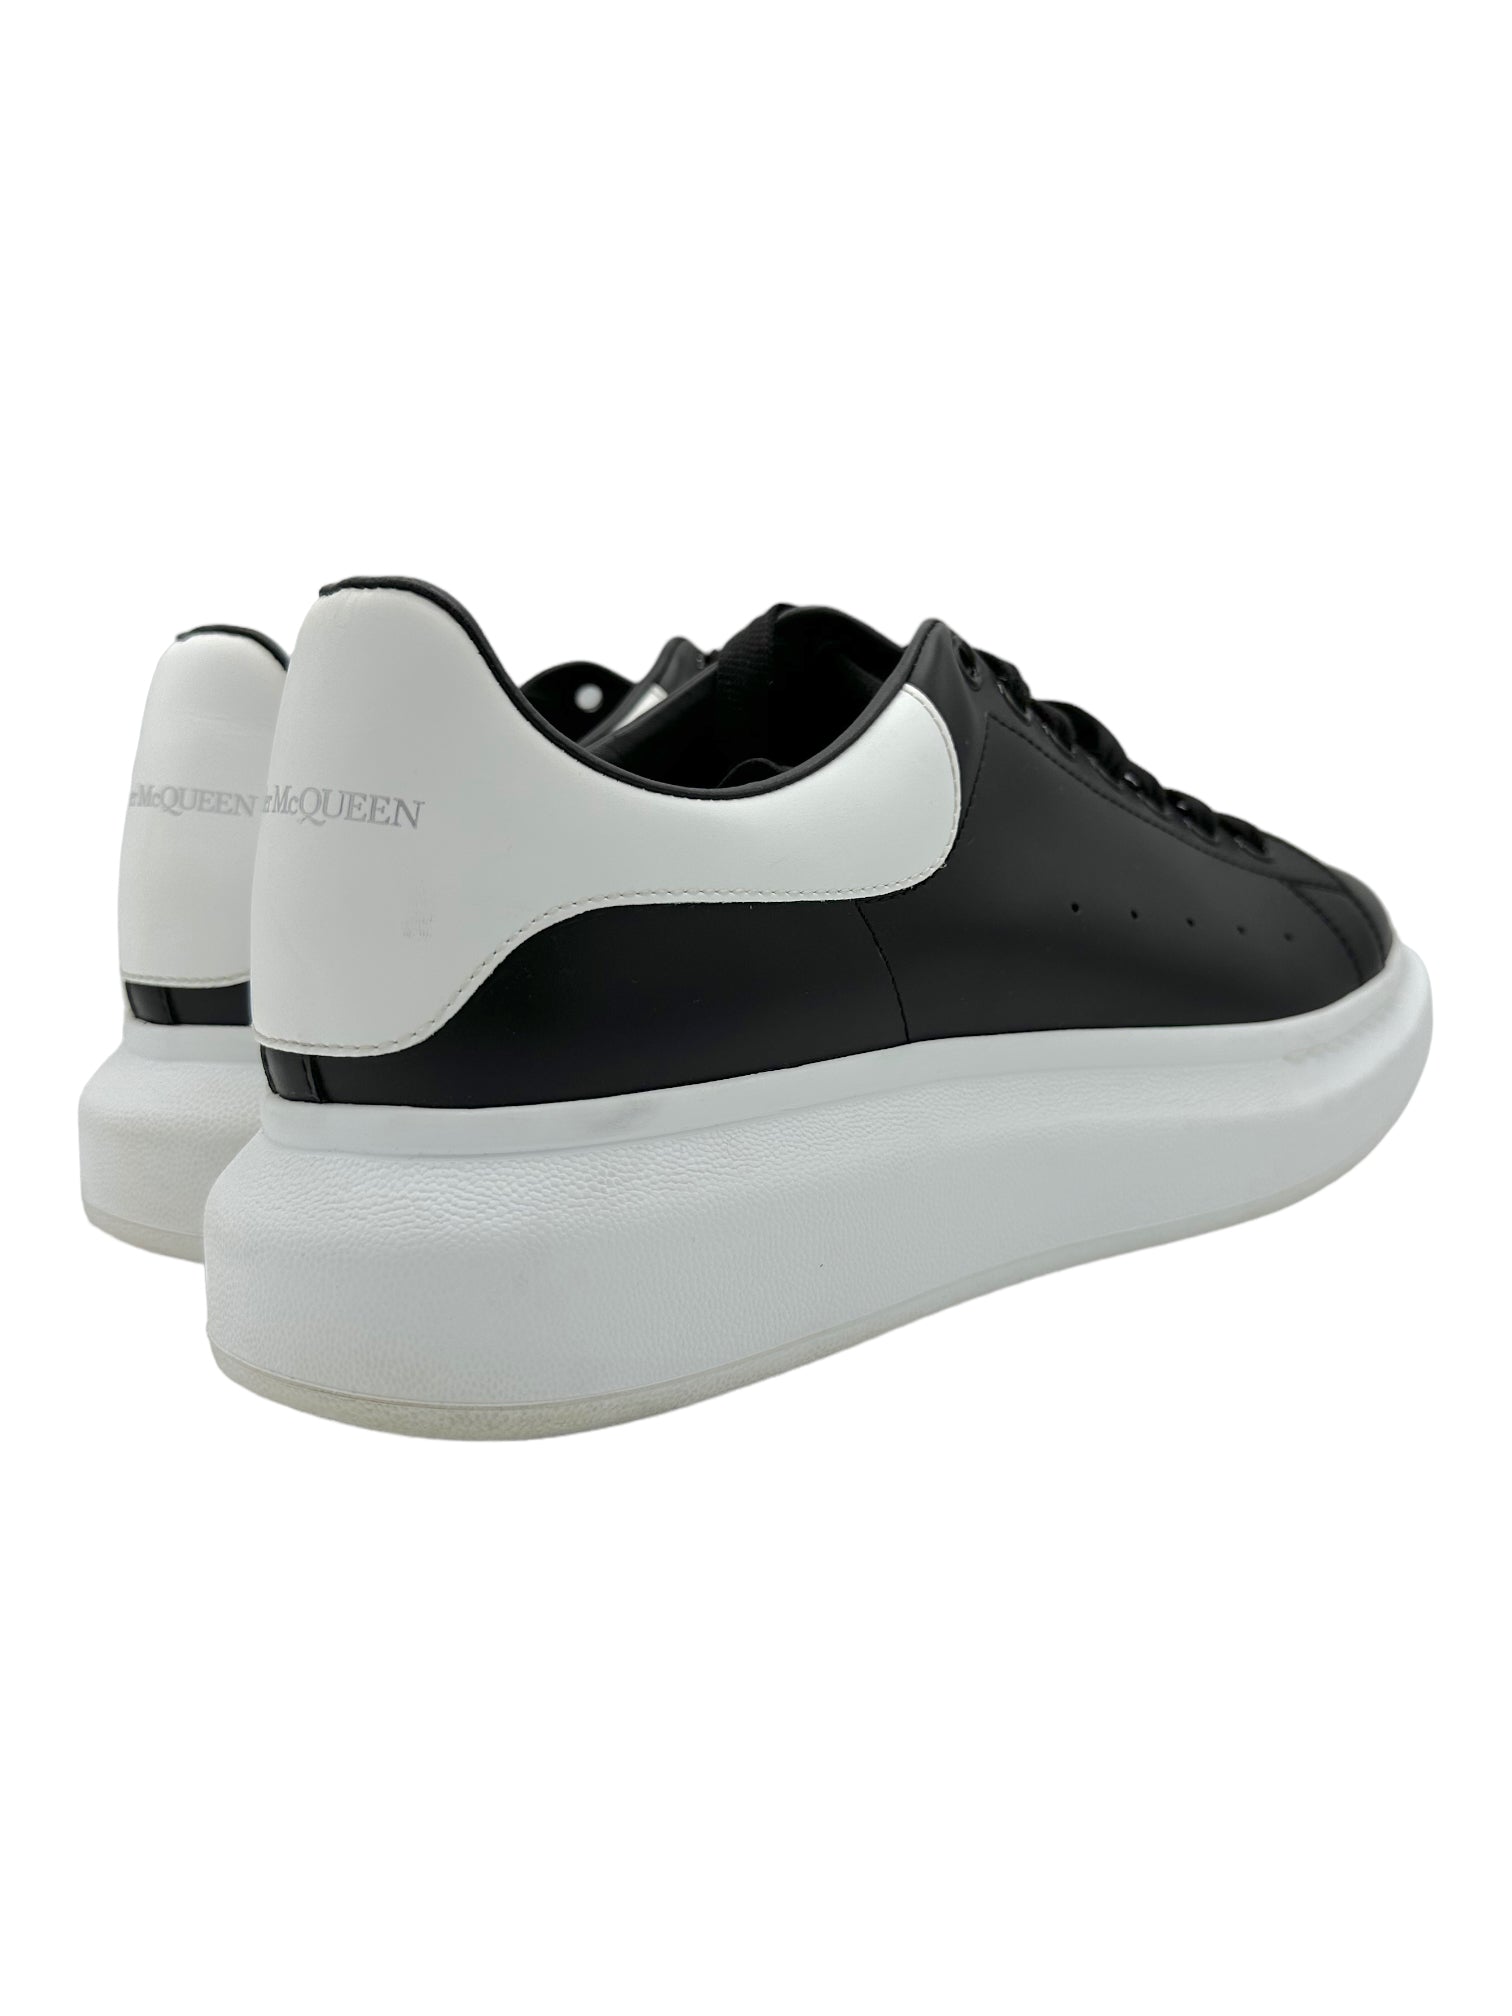 Alexander McQueen Oversized Black & White Sneaker - Genuine Design Luxury Consignment for Men. New & Pre-Owned Clothing, Shoes, & Accessories. Calgary, Canada